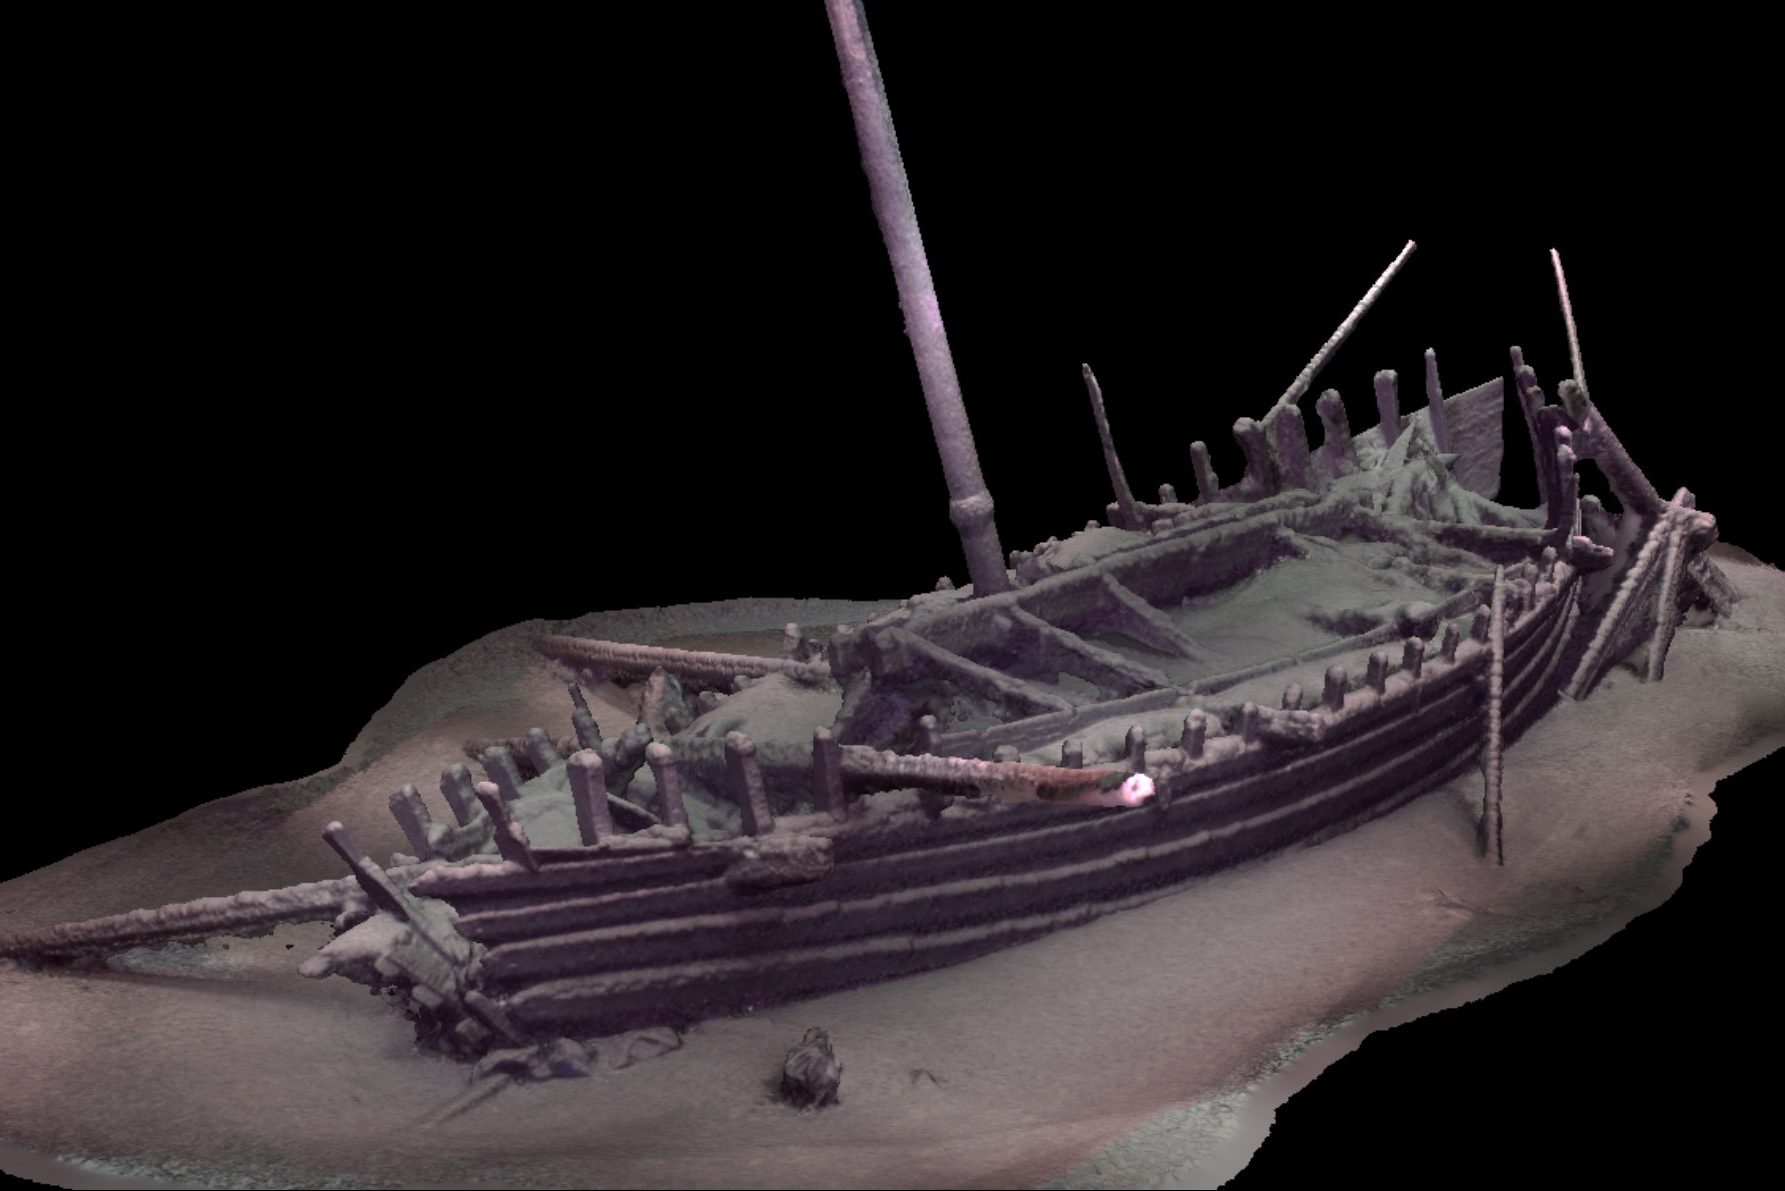 A 3-D re-creation of a Roman ship found on the floor of the Black Sea. (Black Sea MAP)